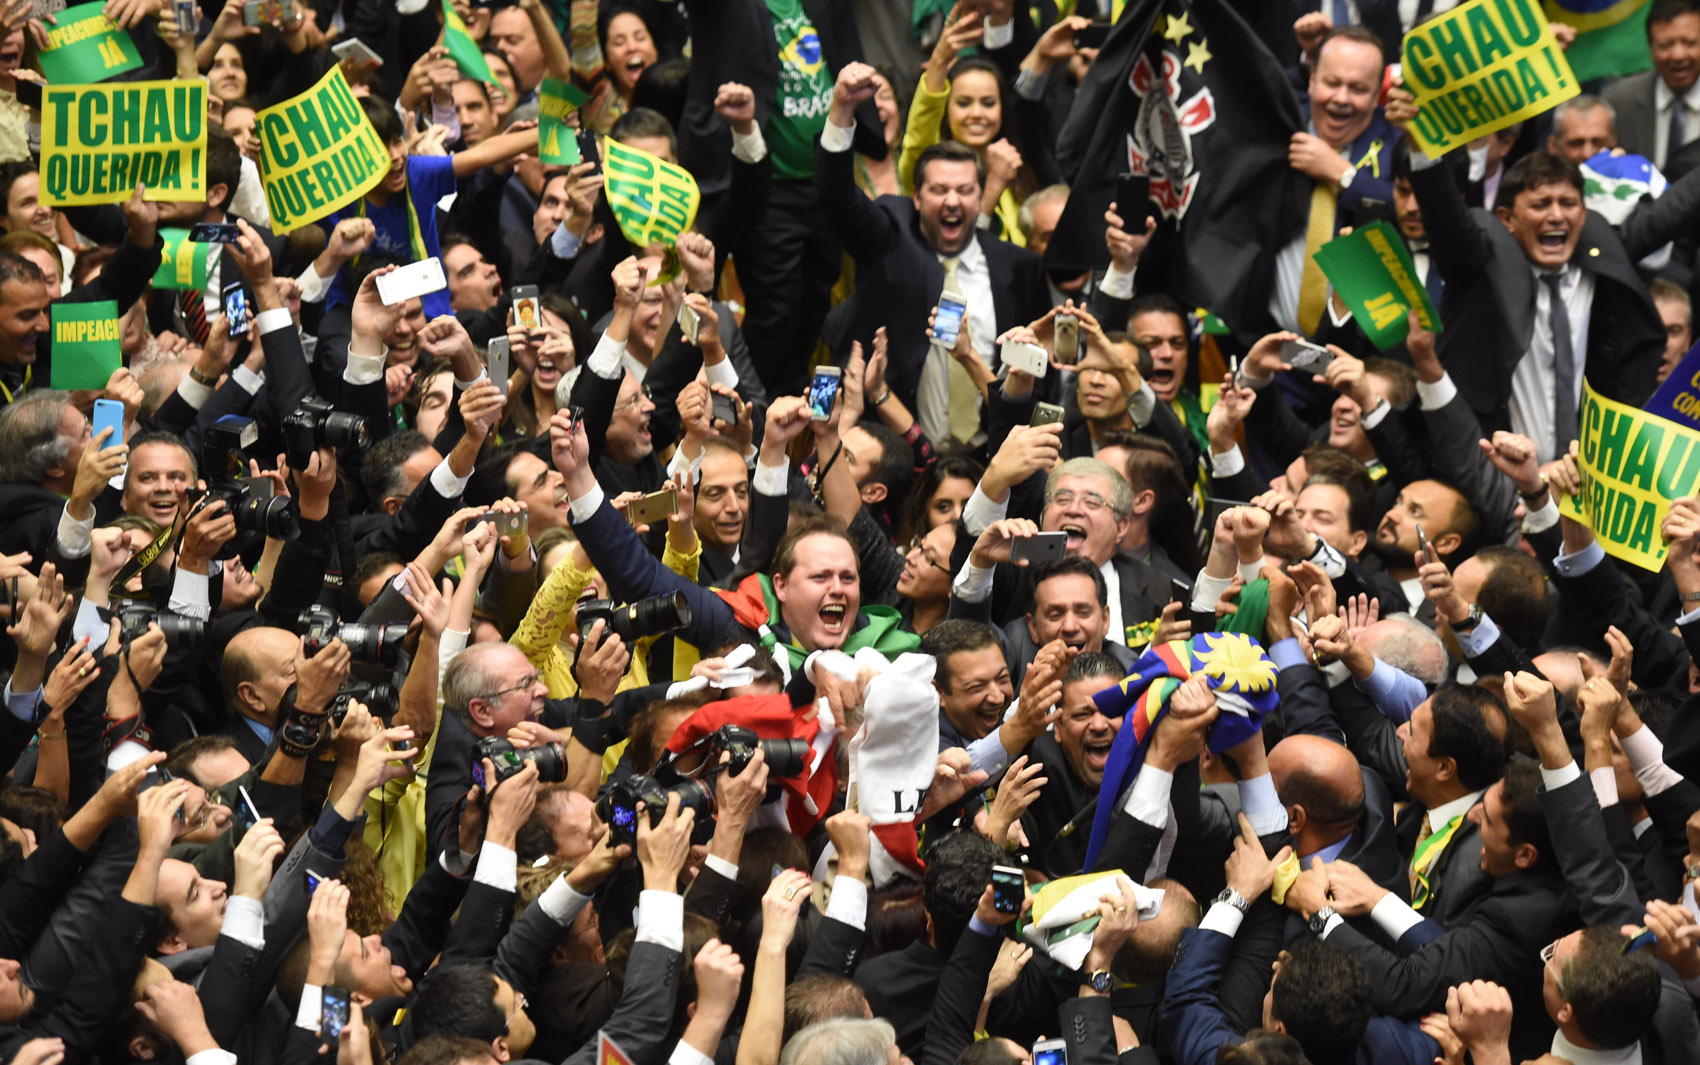 Brazil's lawmakers celebrate after they reached the votes needed to authorize President Dilma Rousseff's impeachment to go ahead, at the Congress in Brasilia on April 17, 2016. Brazilian lawmakers on Sunday reached the two thirds majority necessary to authorize impeachment proceedings against President Dilma Rousseff. The lower house vote sends Rousseff's case to the Senate, which can vote to open a trial. A two thirds majority in the upper house would eject her from office. Rousseff, whose approval rating has plunged to a dismal 10 percent, faces charges of embellishing public accounts to mask the budget deficit during her 2014 reelection. / AFP PHOTO / EVARISTO SA